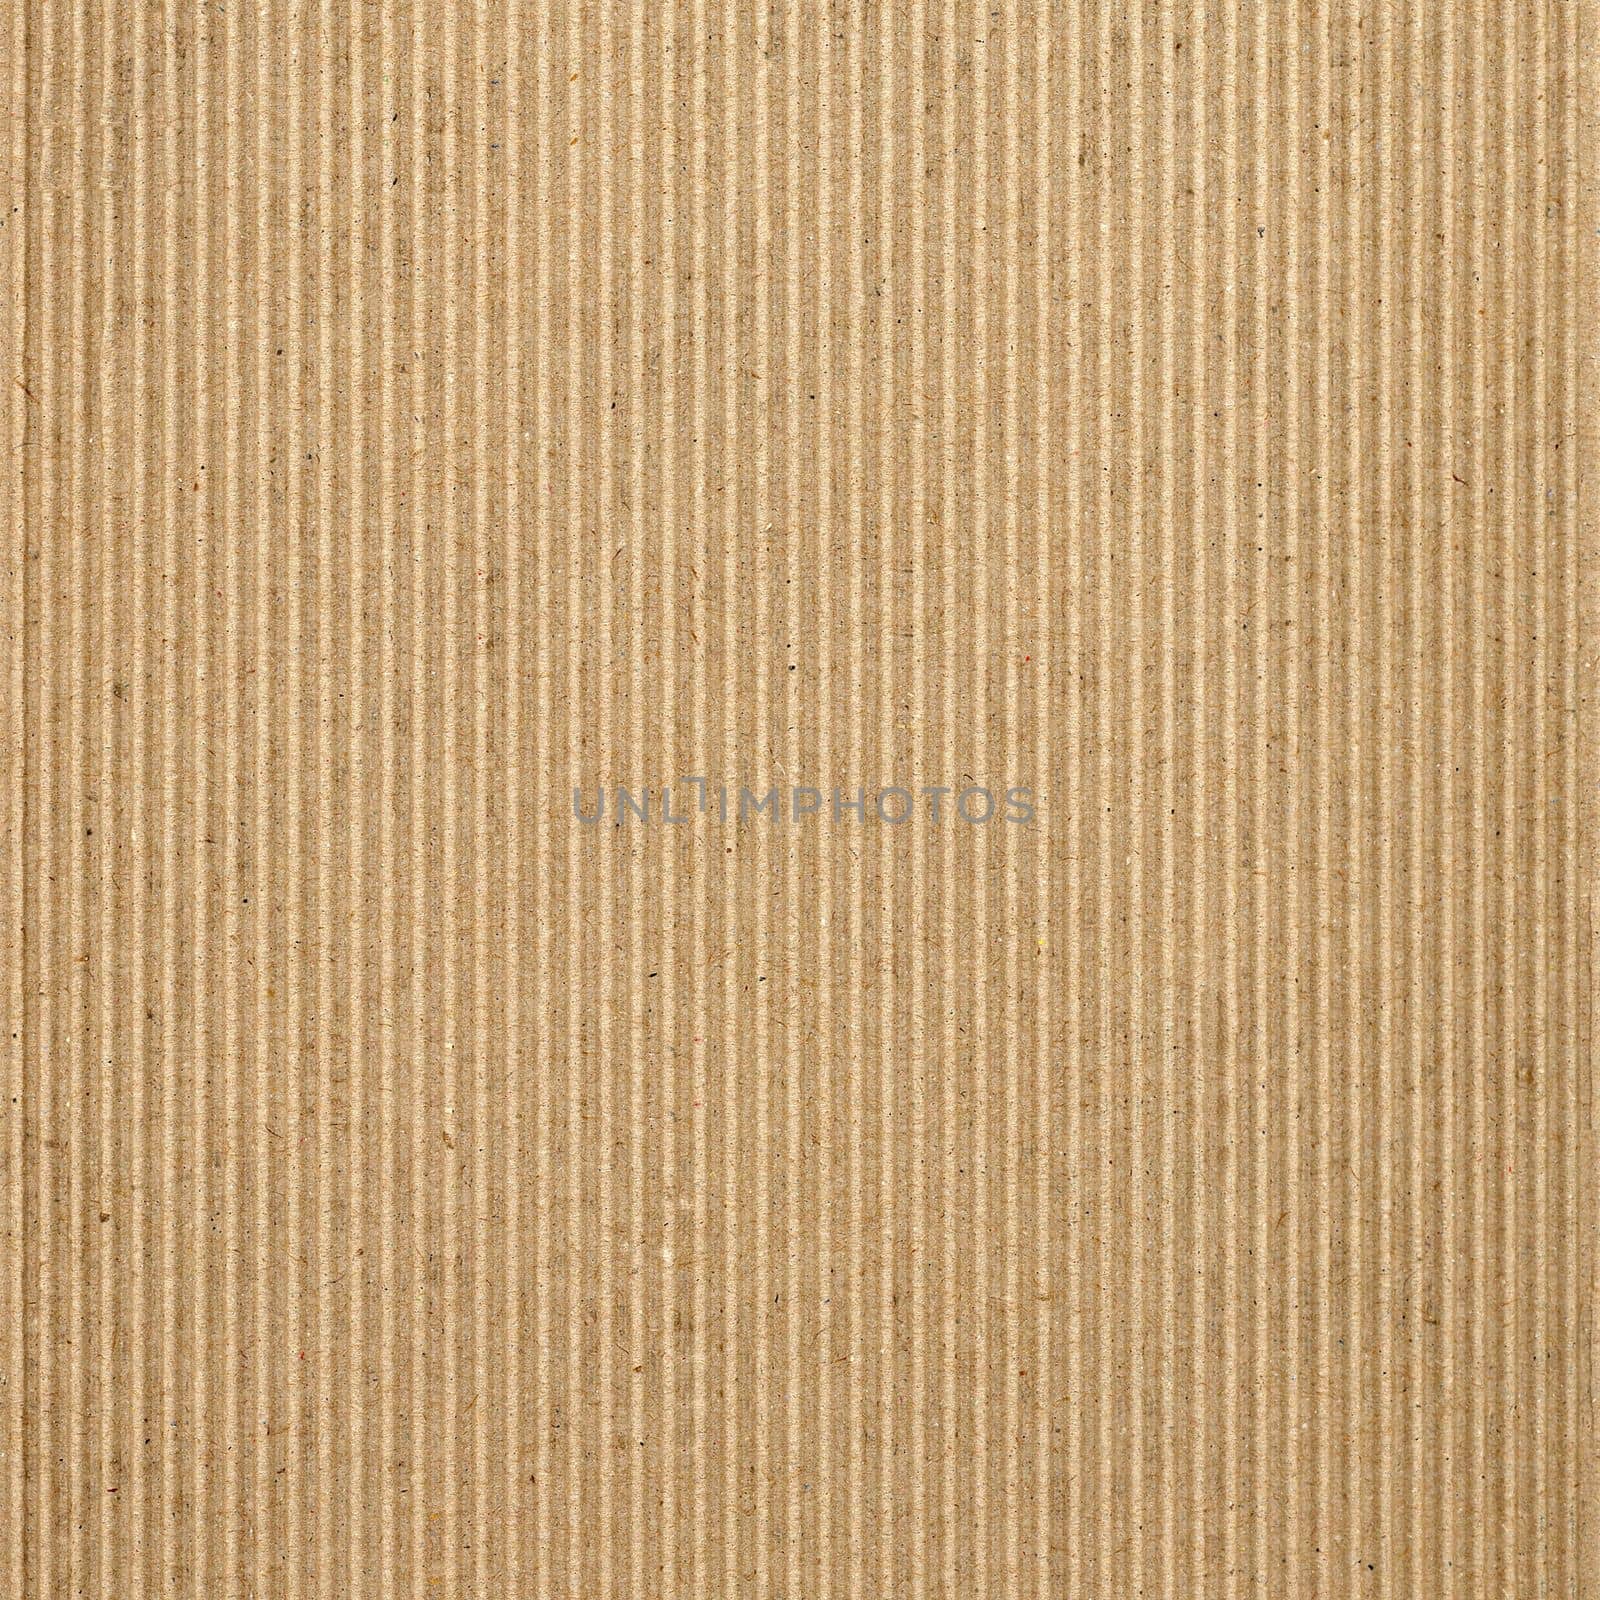 Brown corrugated cardboard texture background by claudiodivizia